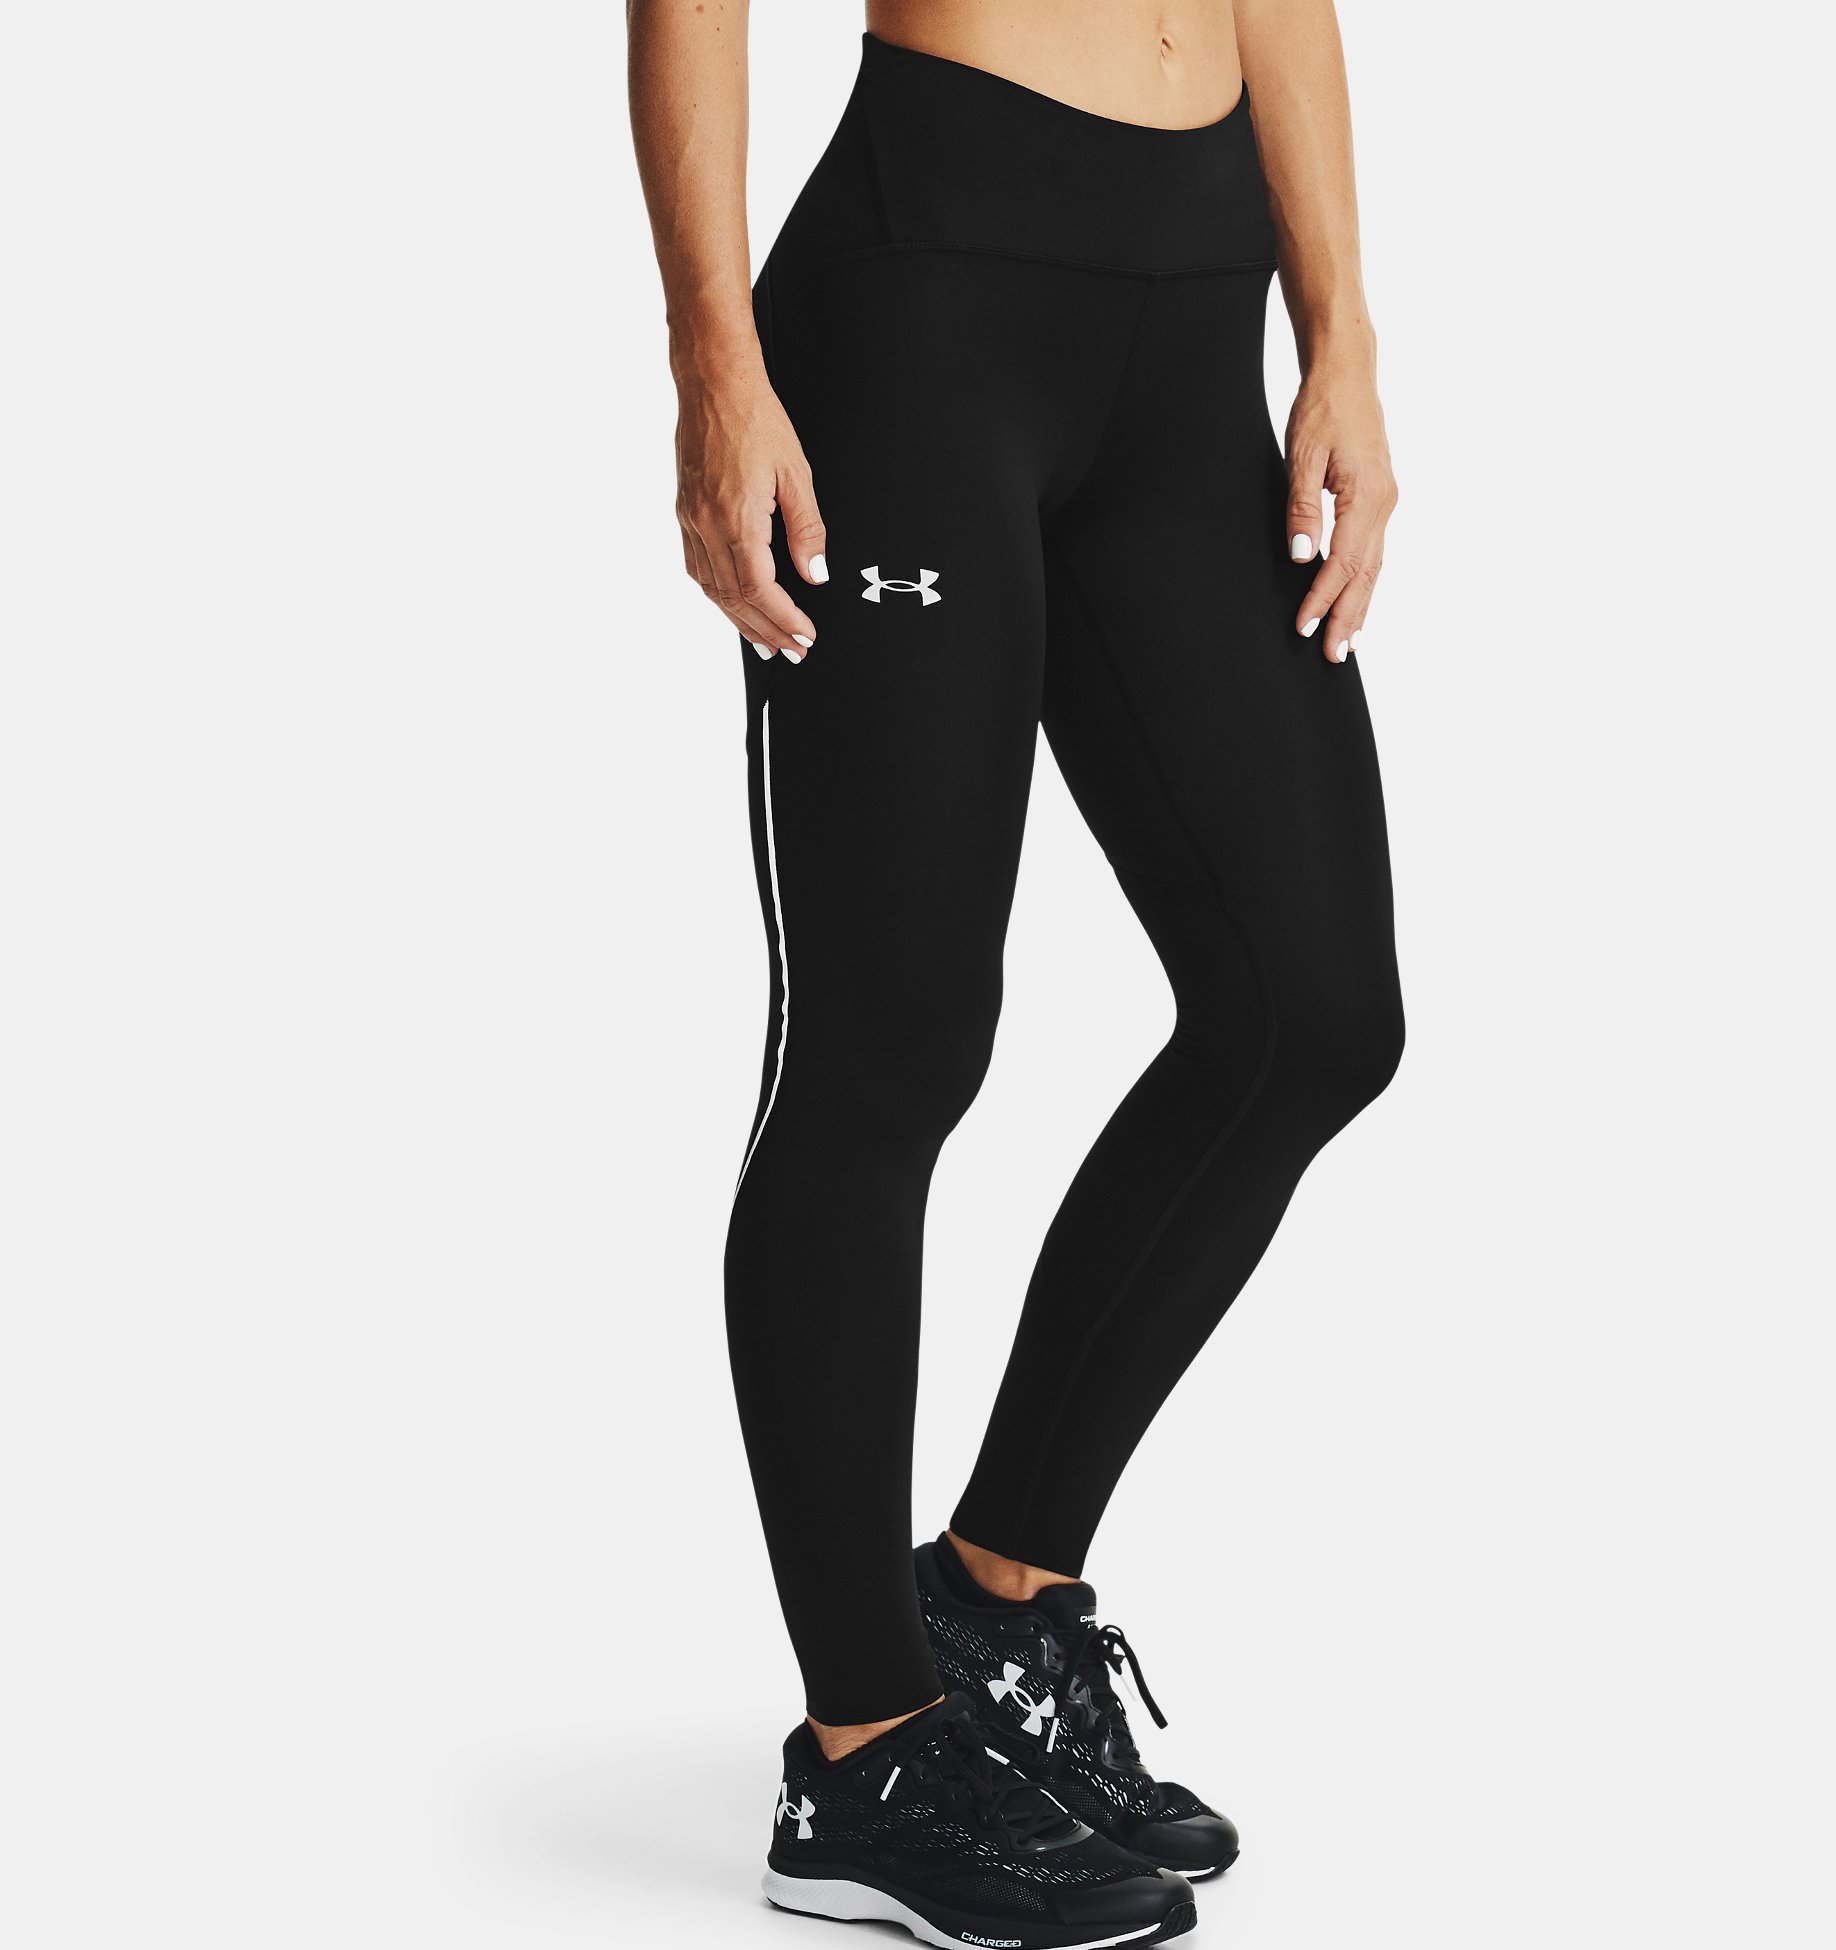 New Under Armour UA Women's Cold Gear Armour Gym Running Leggings 